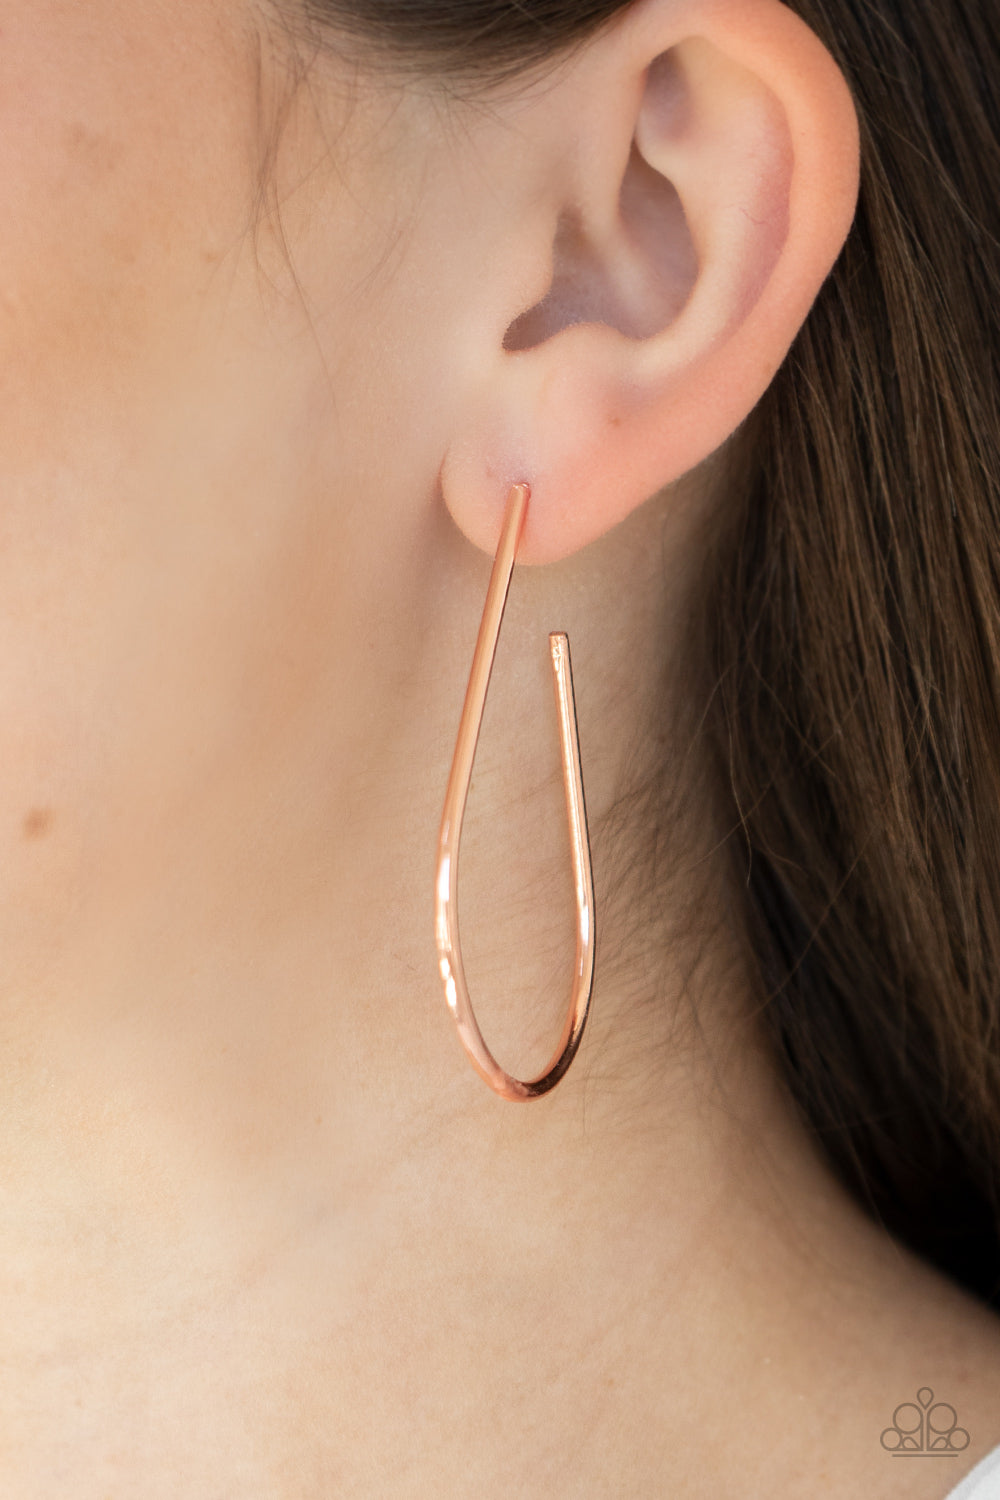 Paparazzi Earrings - City Curves - Copper